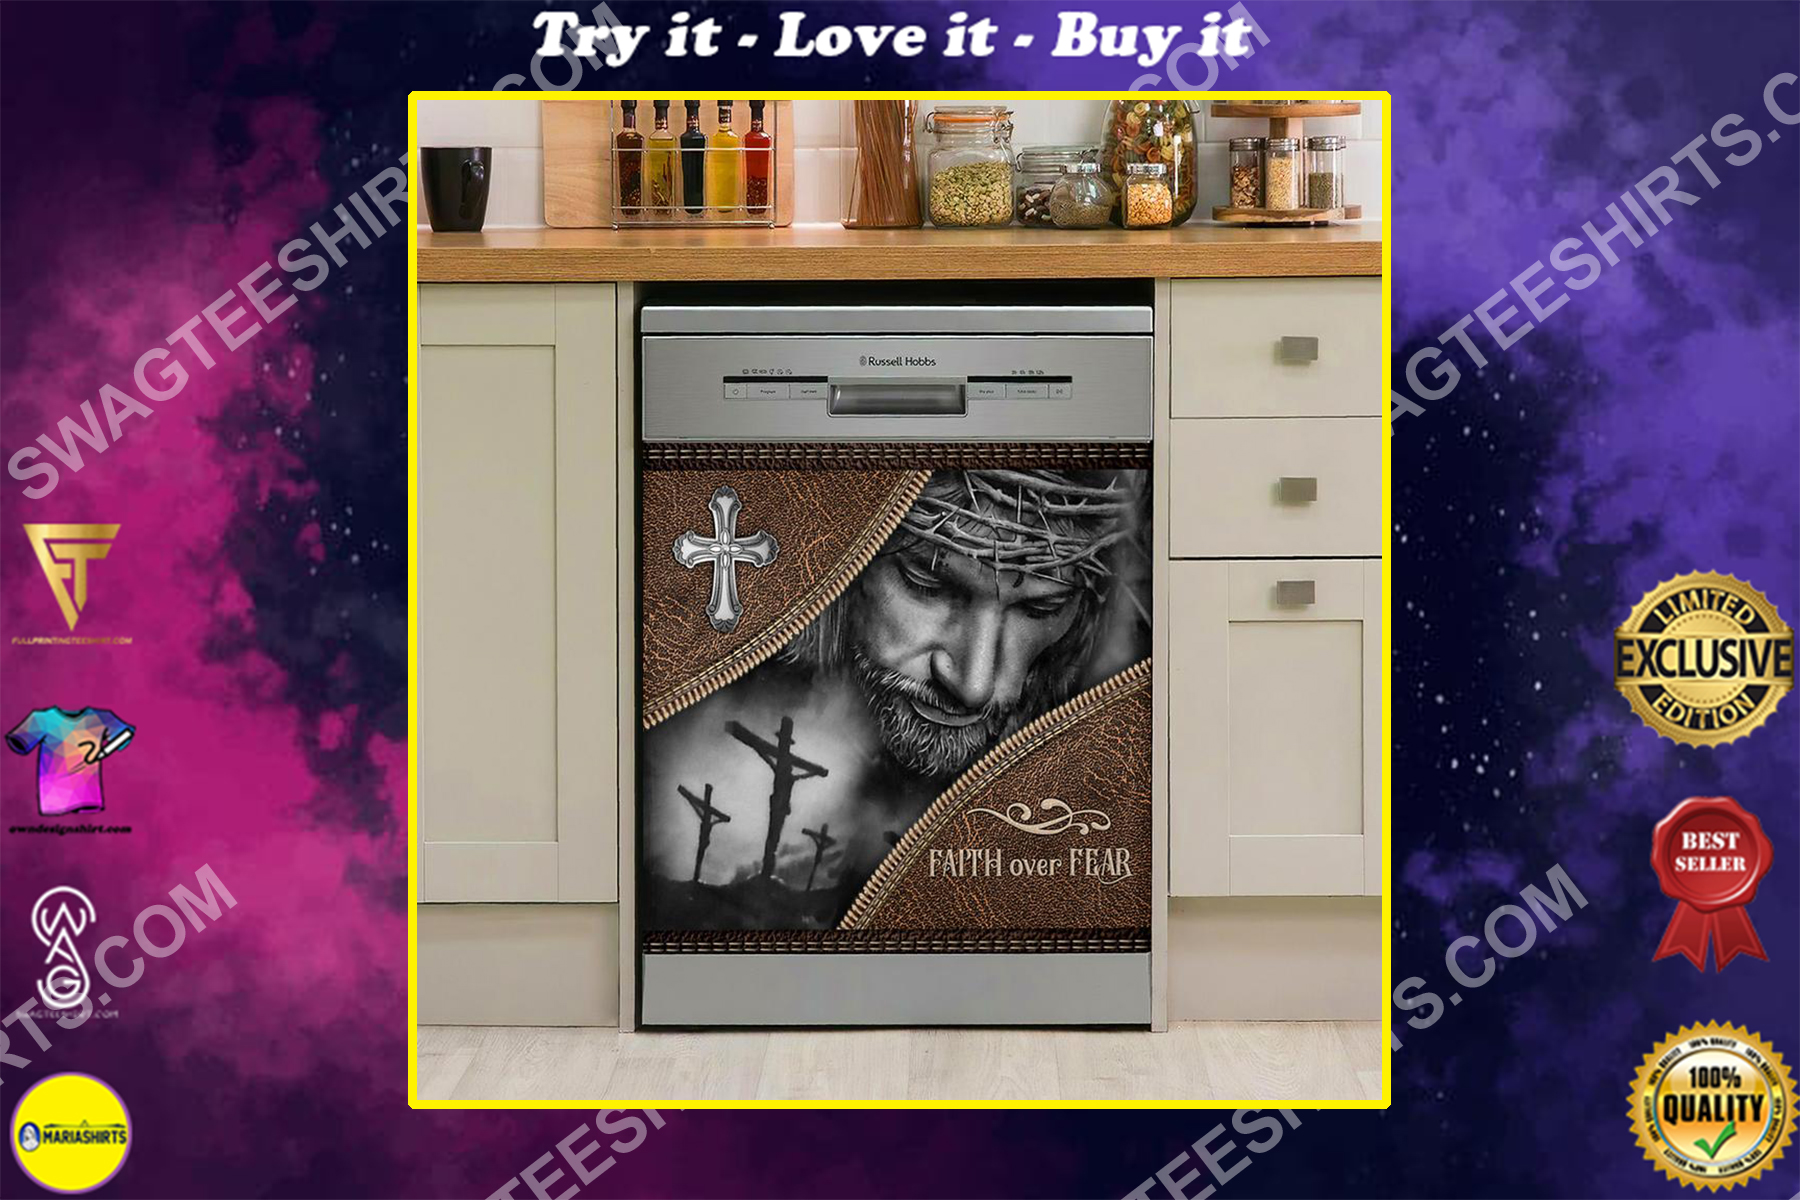 God faith over fear kitchen decorative dishwasher magnet cover